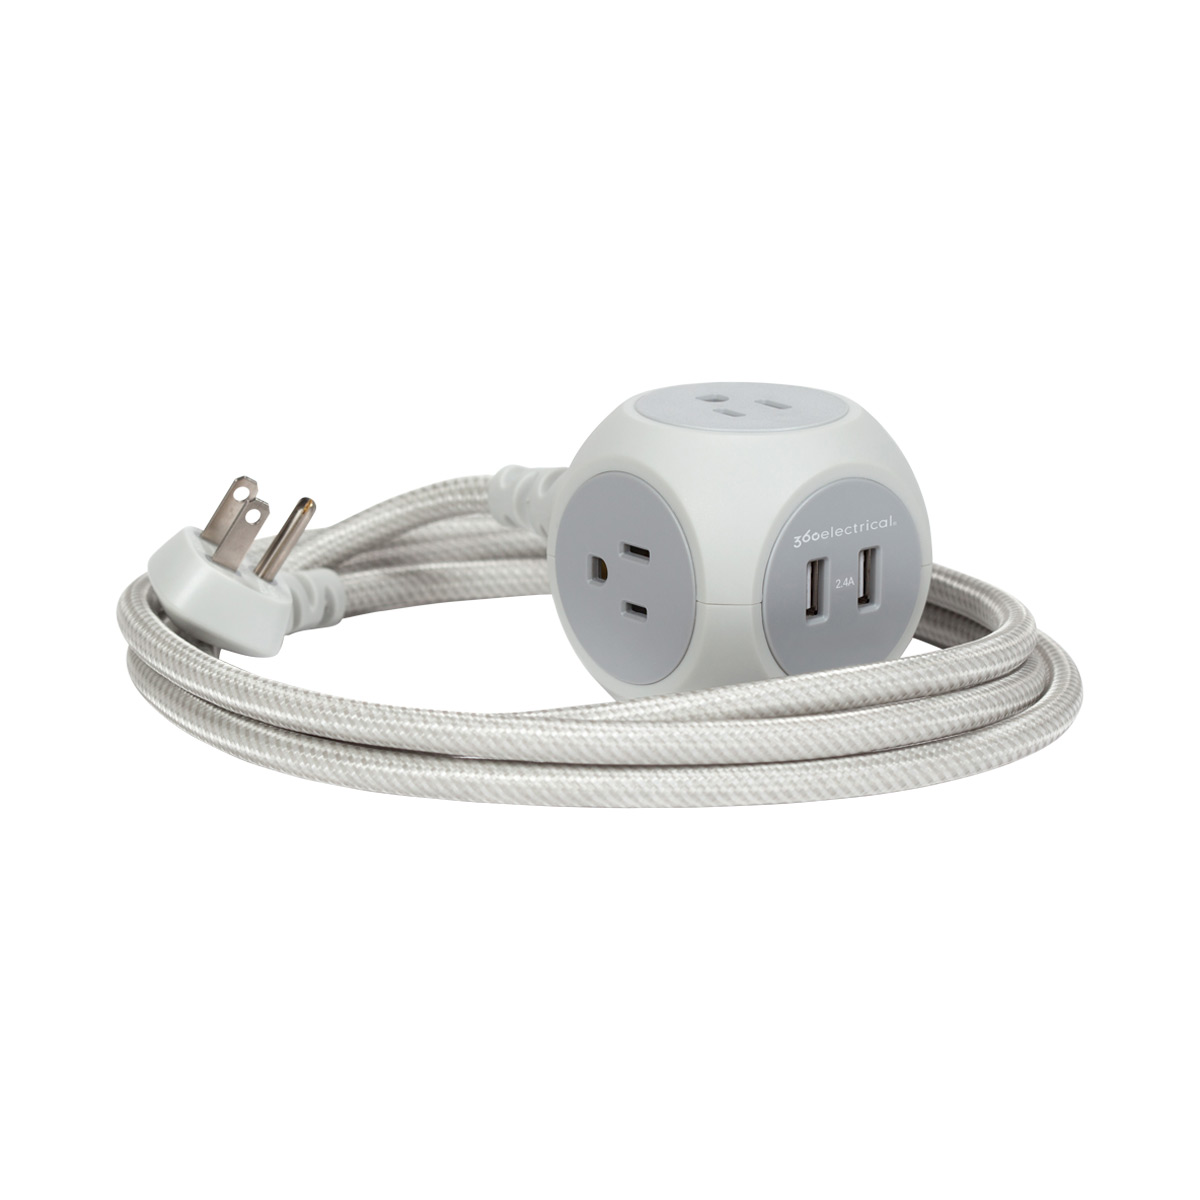 USB Combo Pack Blue 360 Electrical Habitat Extension Cord